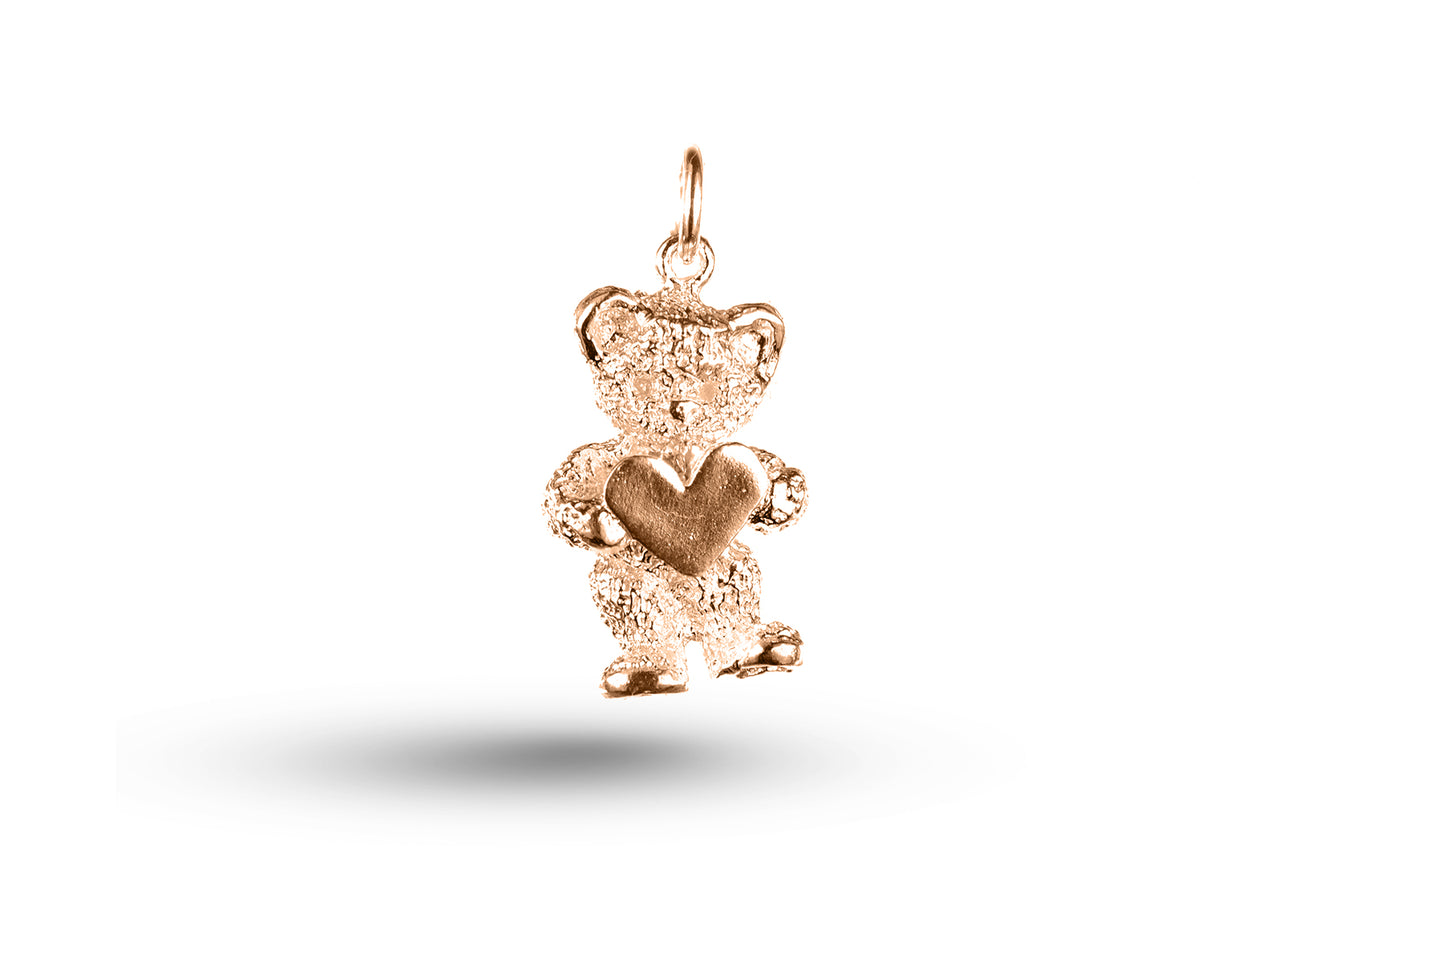 Rose gold Teddy with Heart charm.